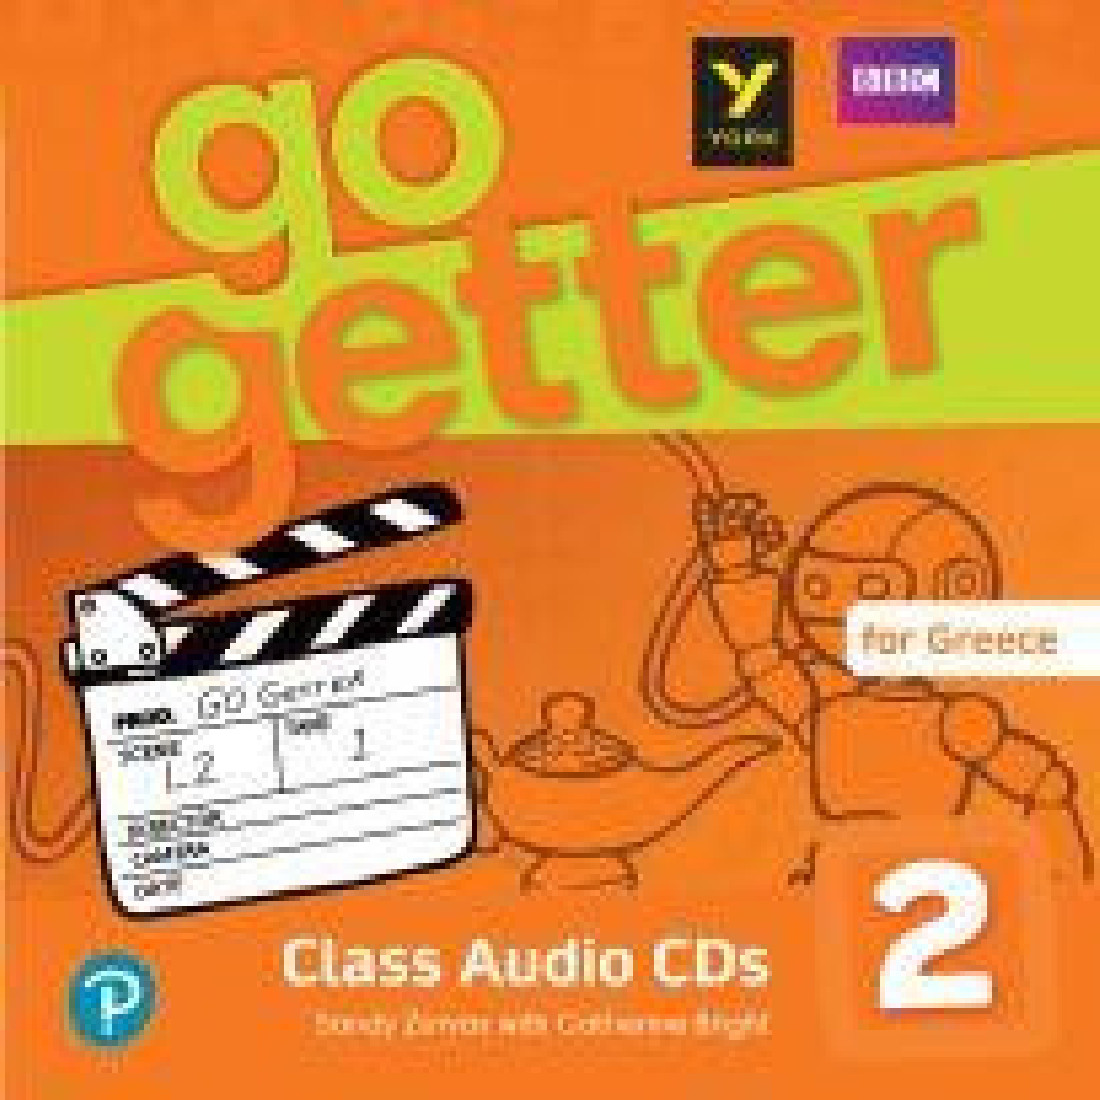 GO GETTER FOR GREECE 2 CD AUDIO CLASS